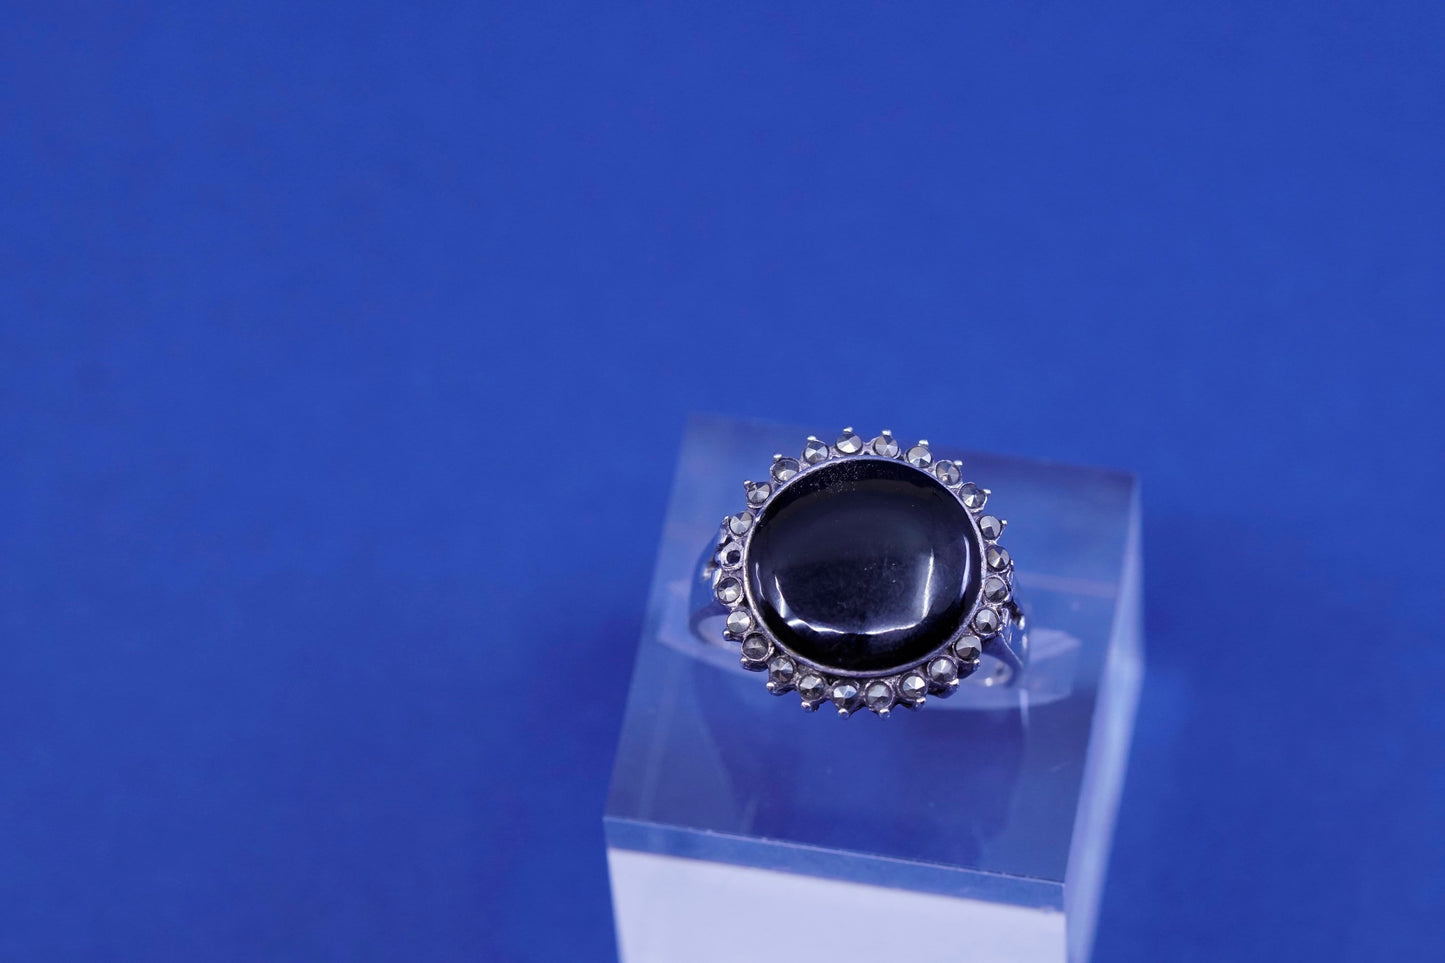 Size 10, vintage Sterling 925 silver handmade ring with obsidian and marcasite